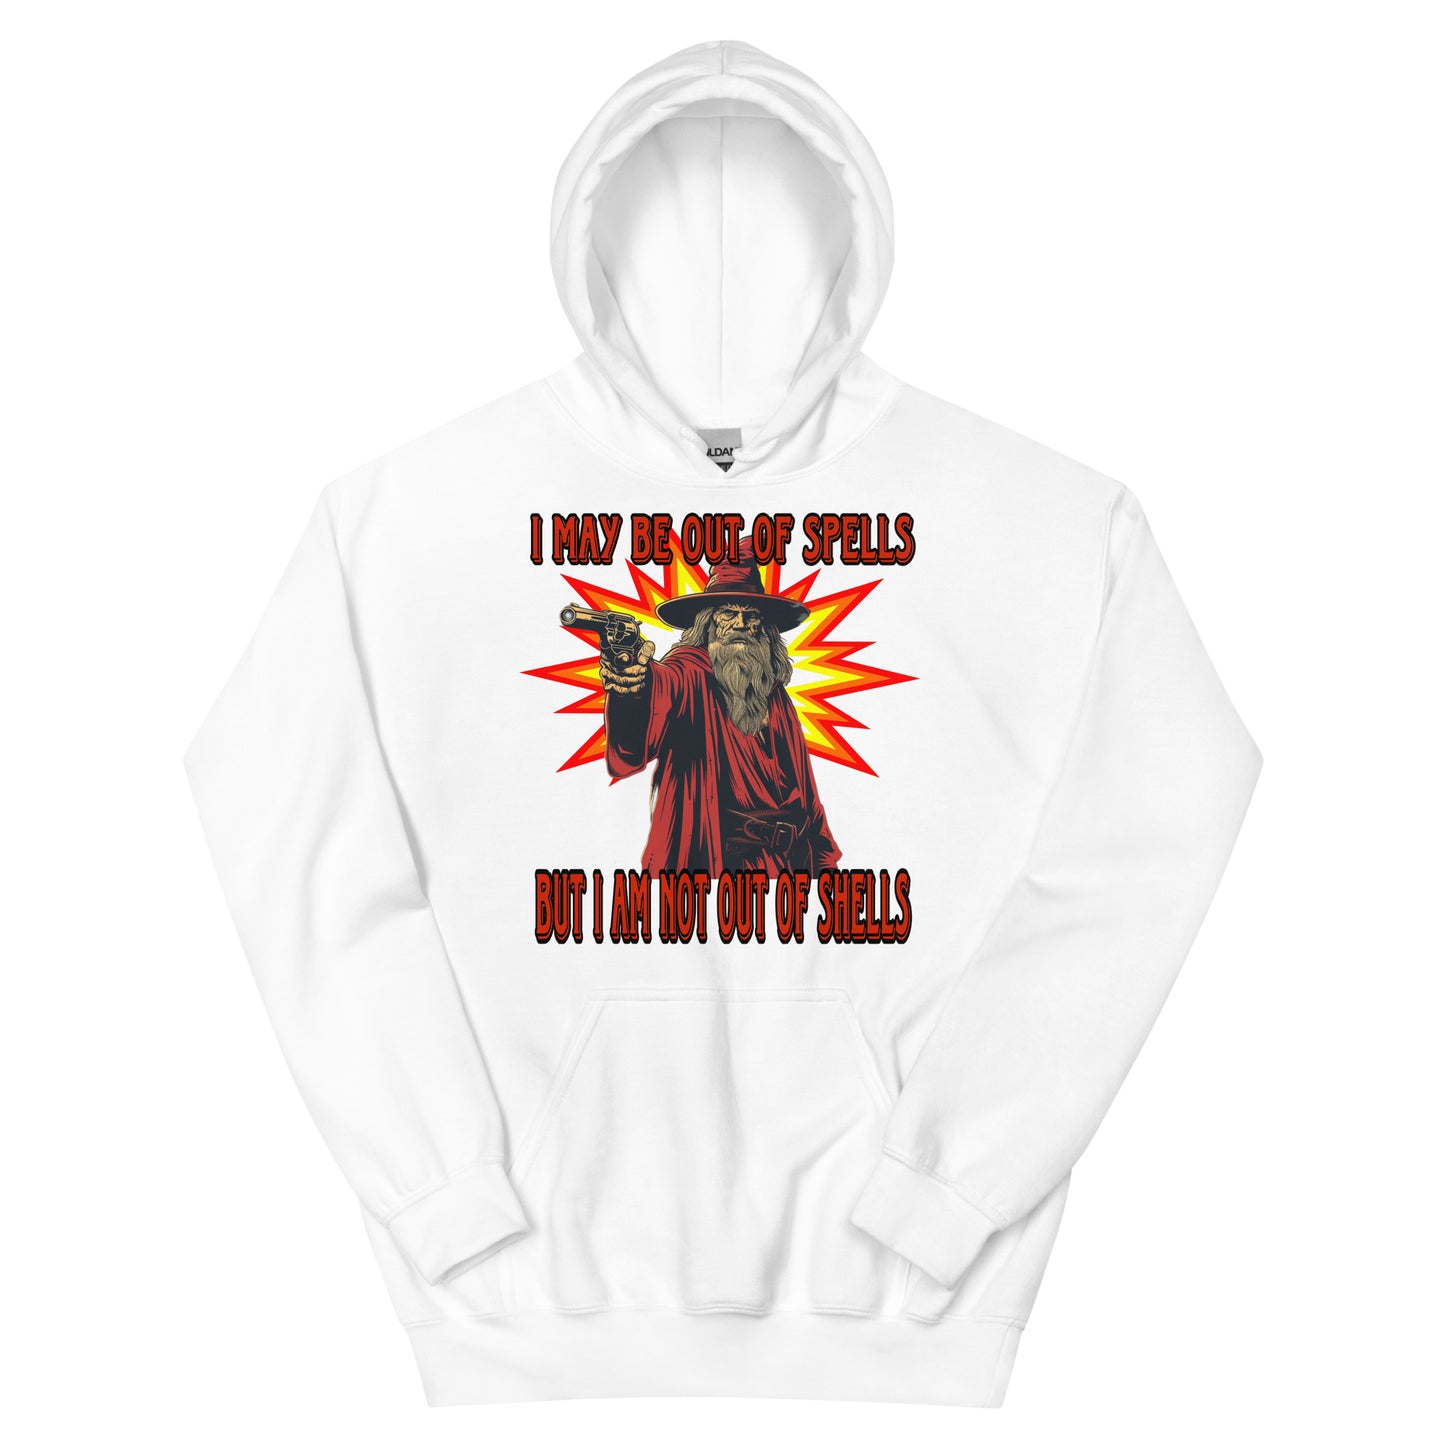 I may be out of spells but I am not out of shells Hoodie